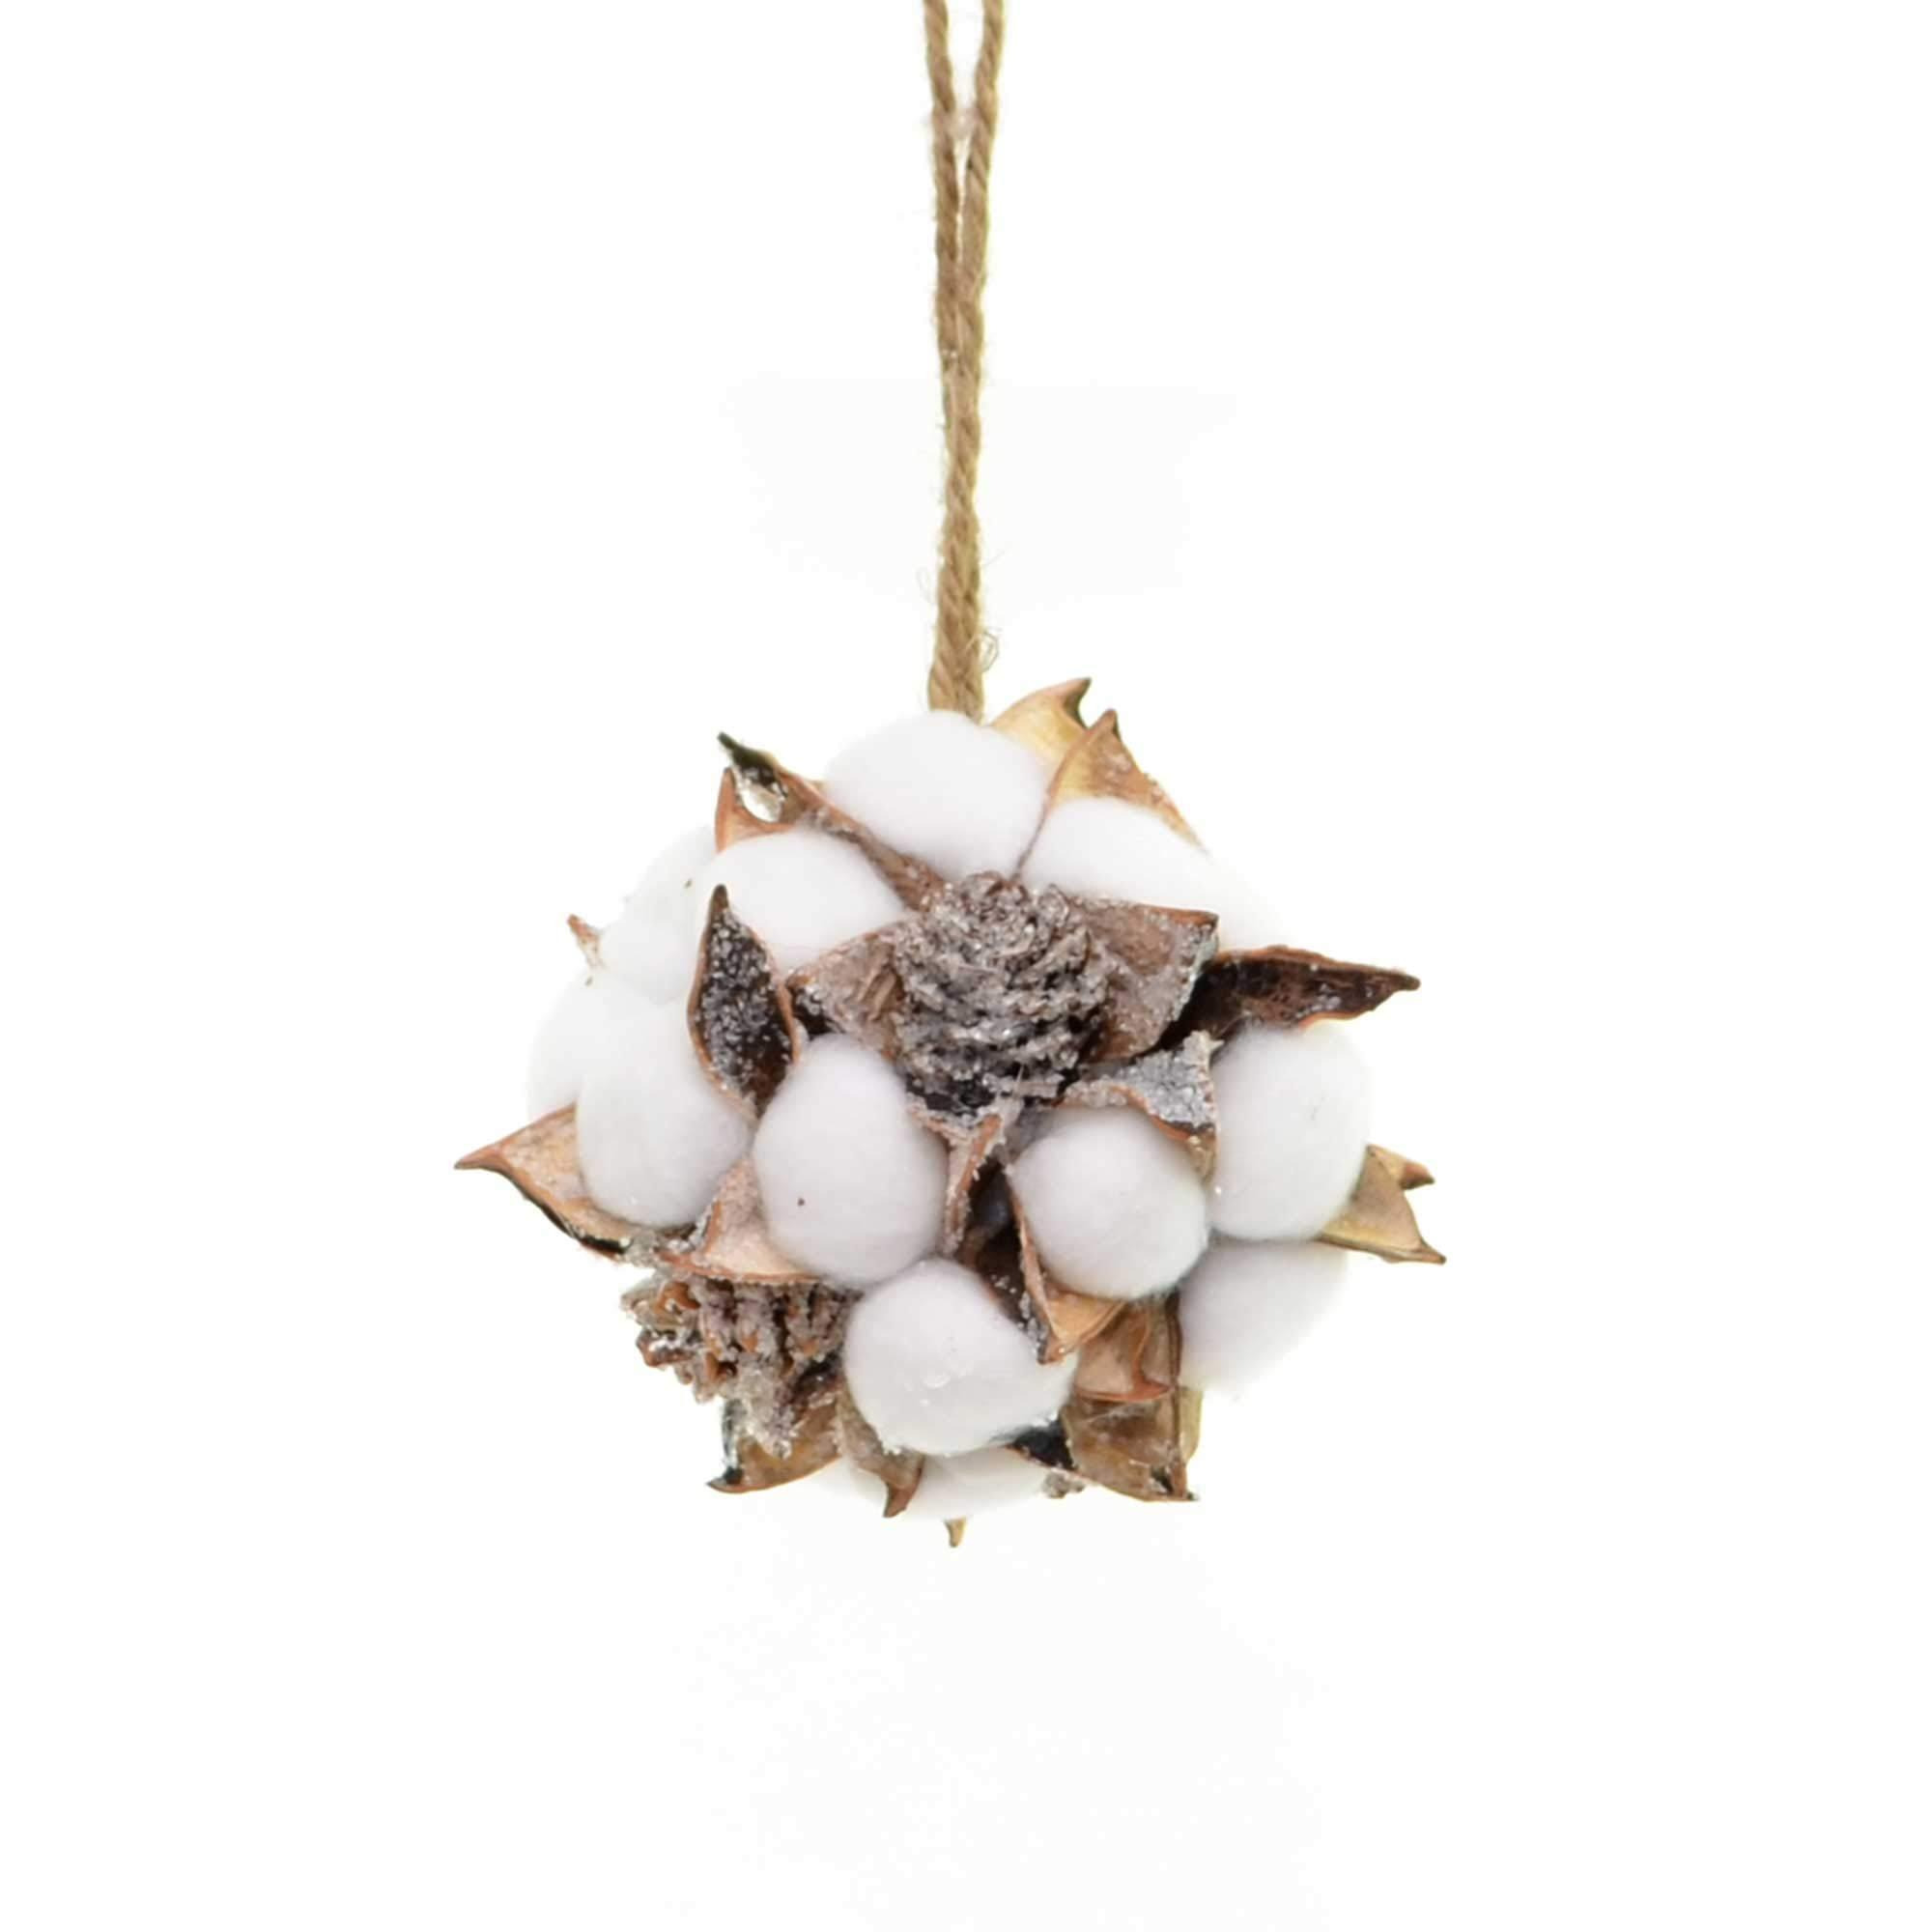 15536S-COTTON-BALL Handmade 10cm Cotton Ball Christmas Hanging Pine Cones  Decoration Home Décor, White/Brown - image 1